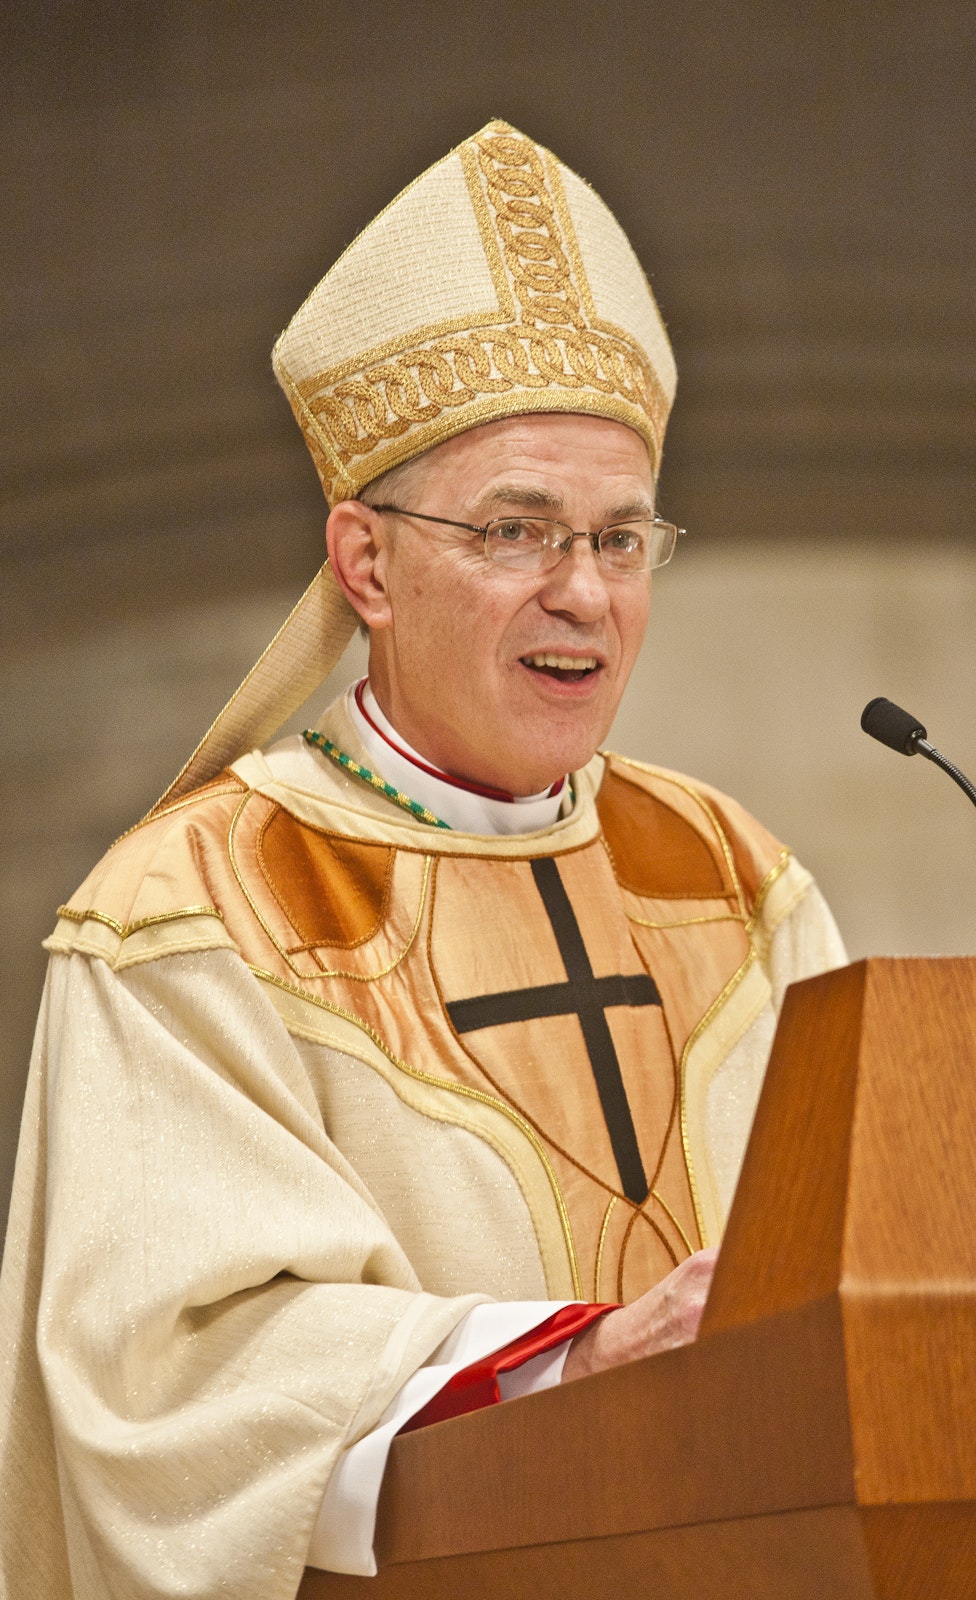 Bishop Hanchon speaks during his episcopal ordination Mass on May 5, 2011, at the Cathedral of the Most Blessed Sacrament, when he was ordained along with (at the time) fellow Auxiliary Bishops Arturo Cepeda and (now Archbishop) Michael J. Byrnes. (Larry A. Peplin | Special to The Michigan Catholic)